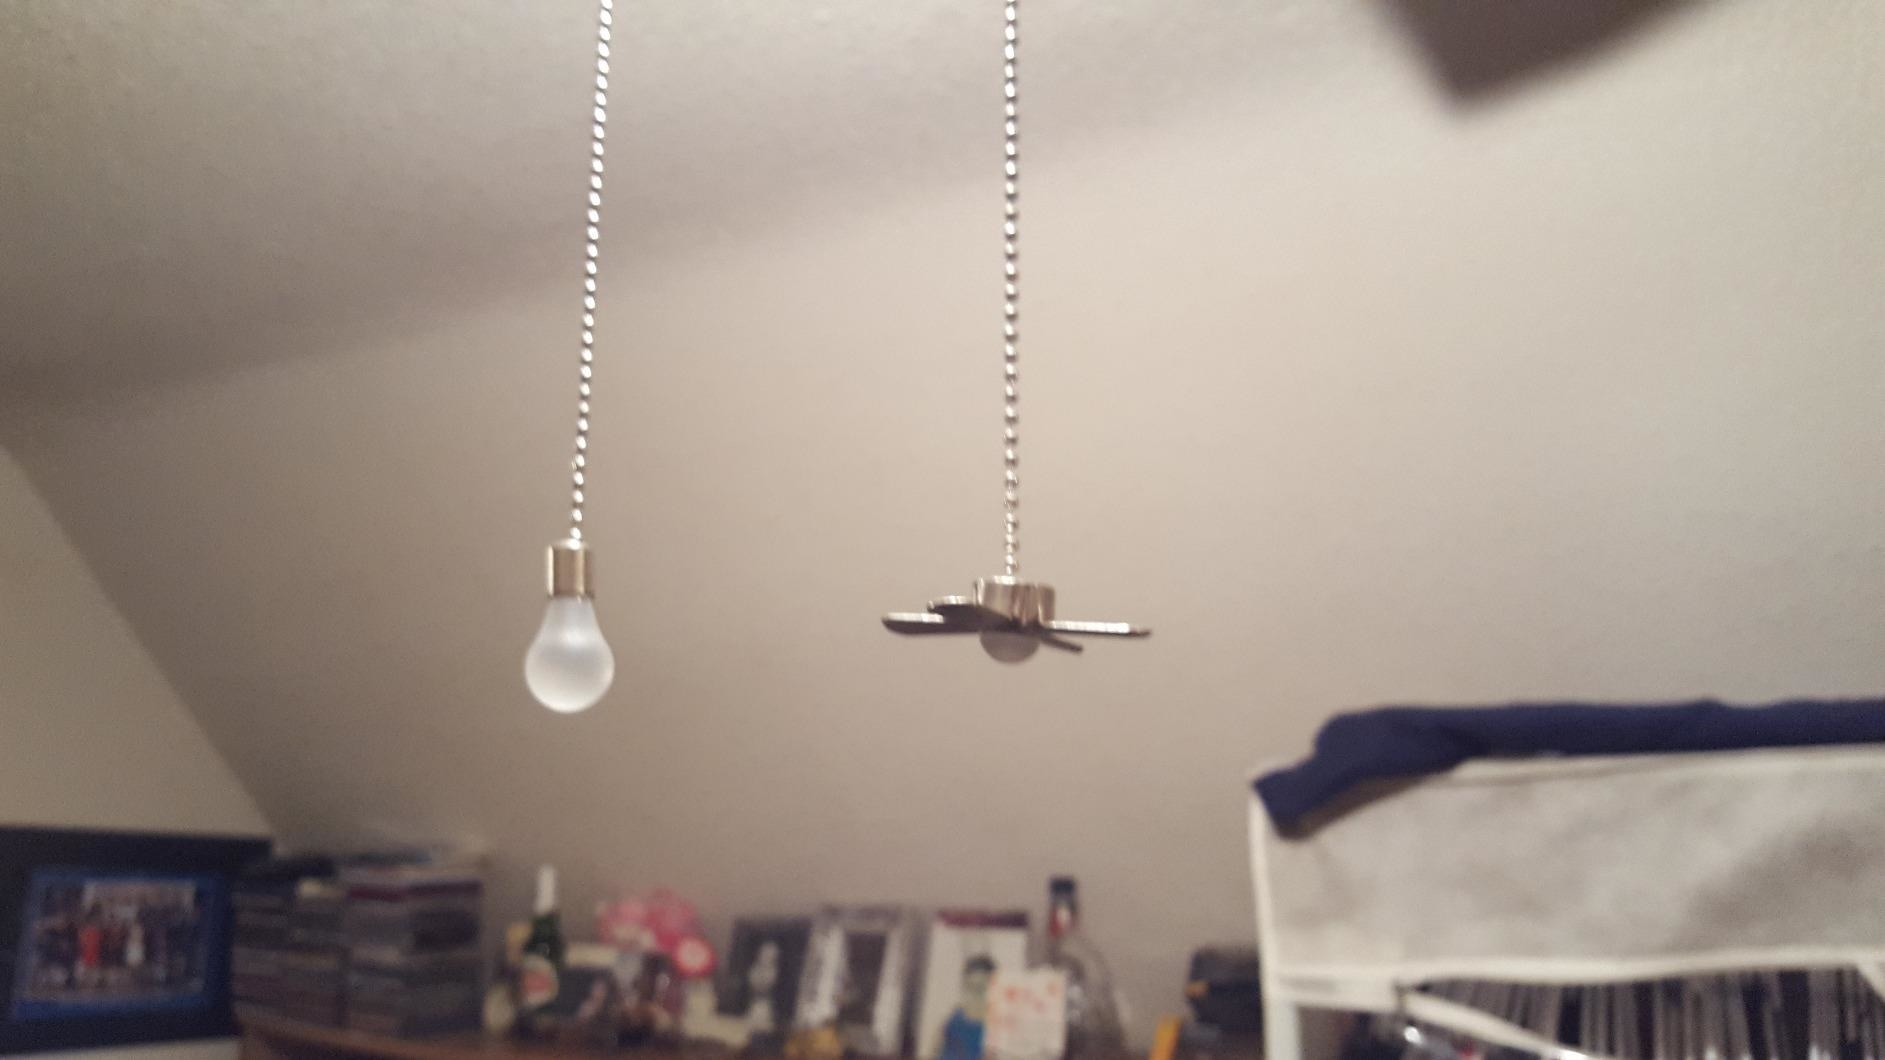 reviewer photo of pull chains (one shaped like light bulb, one shaped like fan) hanging from fan